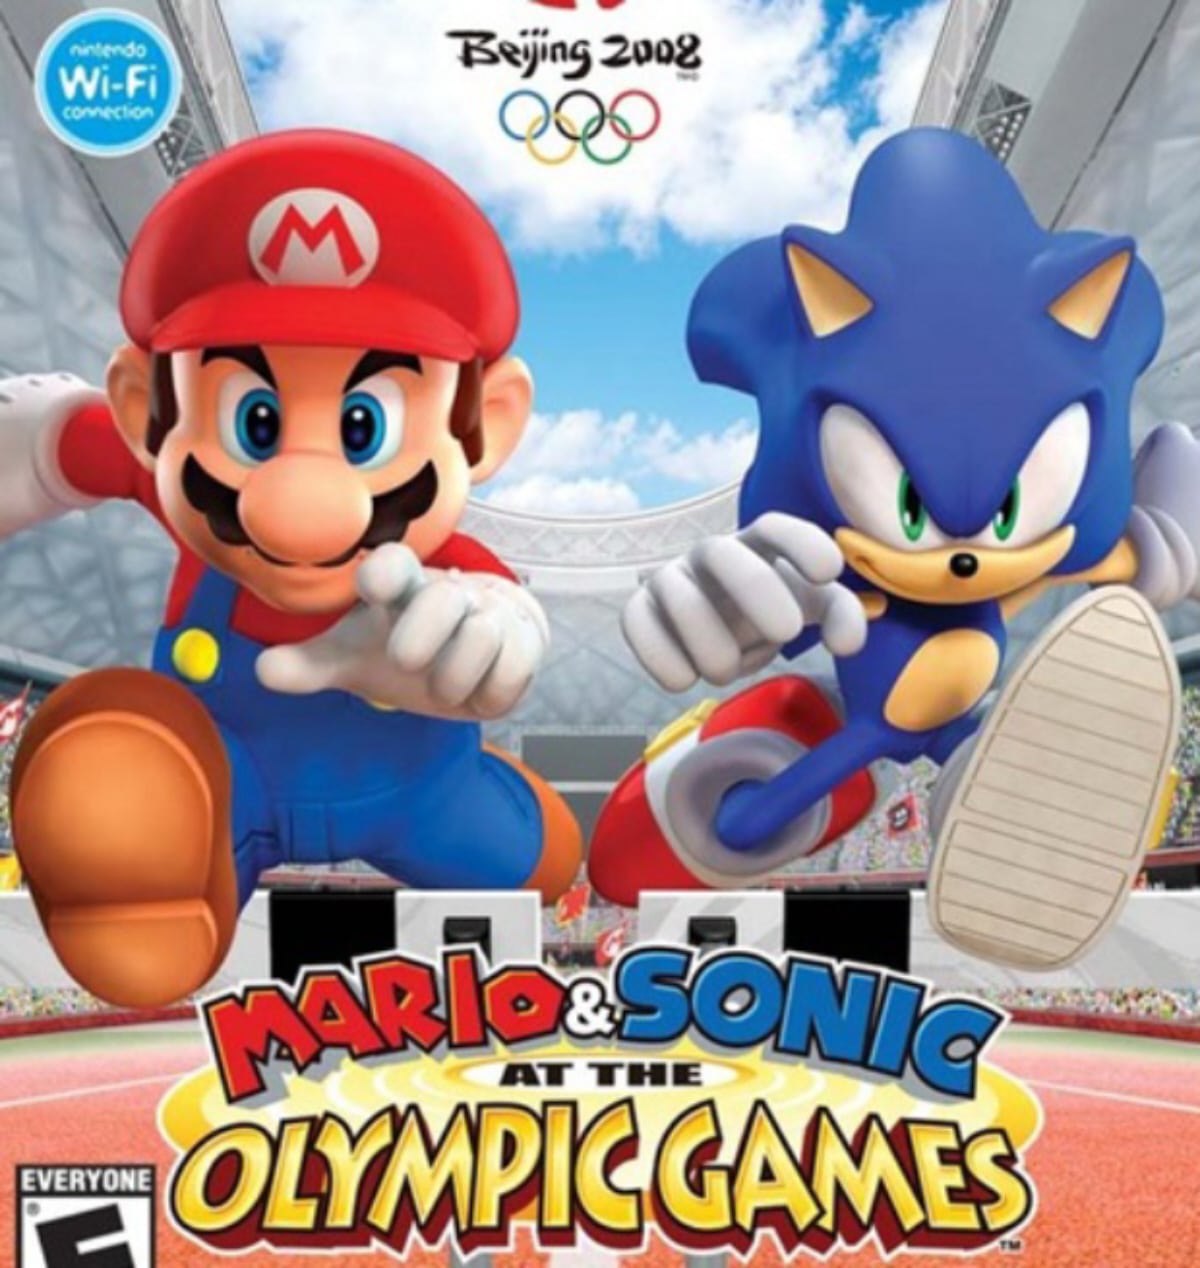 Mario & Sonic at the Olympic Games sells 5 million copies on Wii and DS